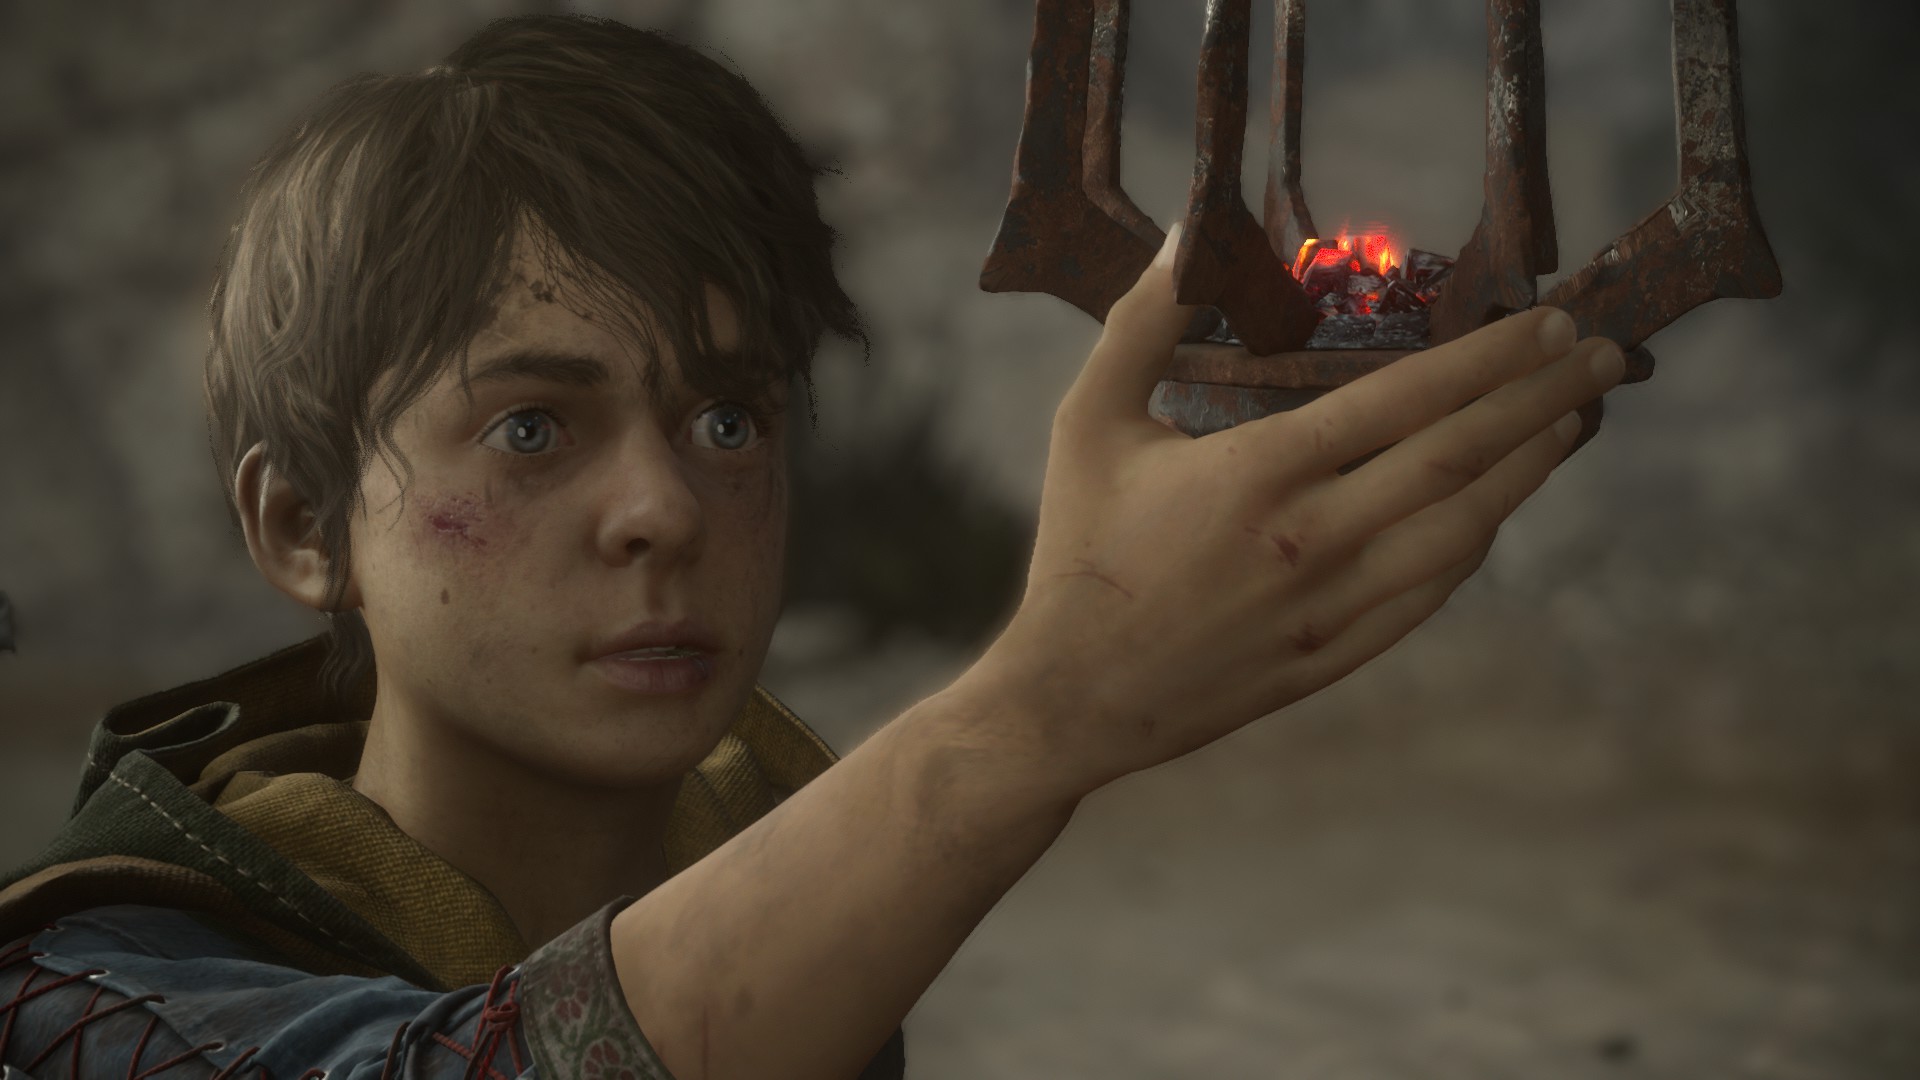 Fresh hints say A Plague Tale 3 is on the way, here's what we know